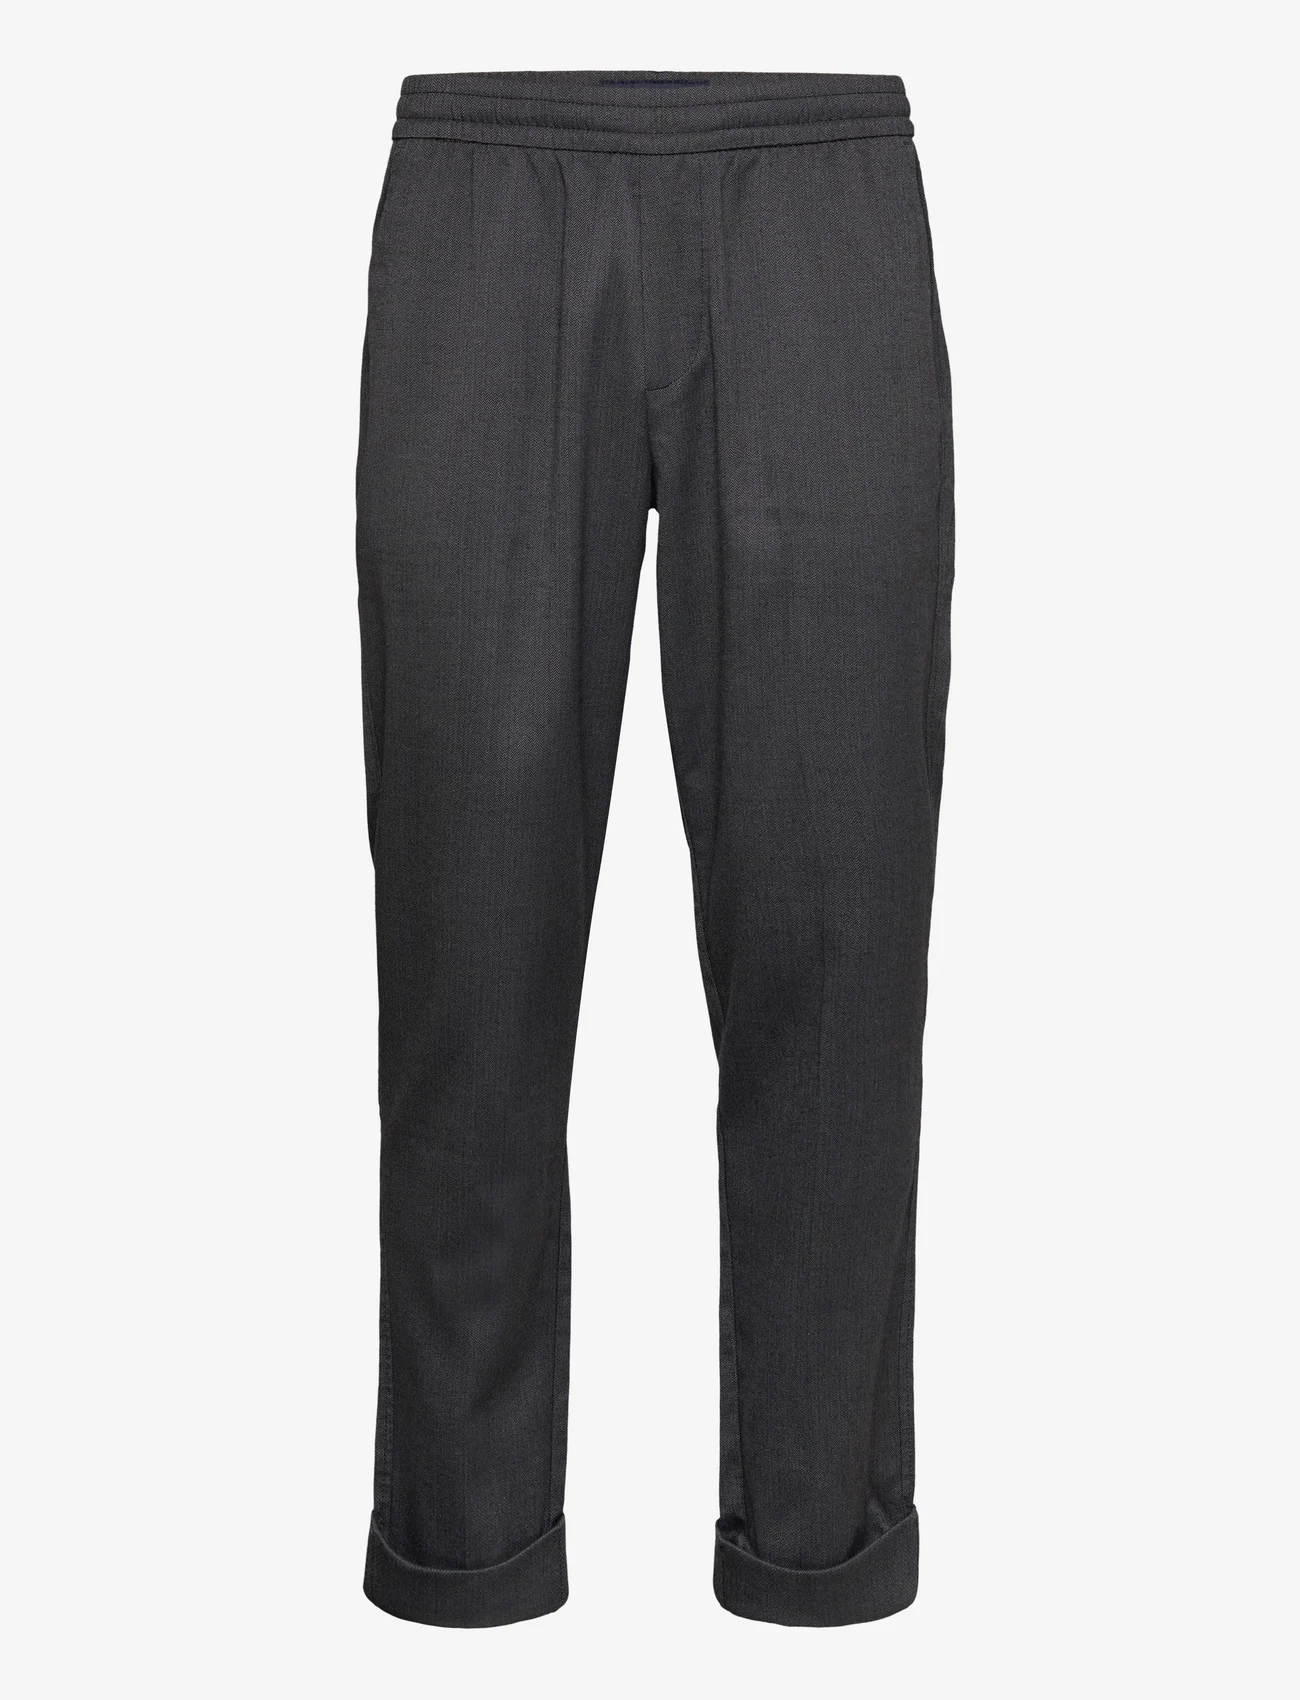 Abercrombie & Fitch - ANF MENS PANTS - ikdienas bikses - charcoal texture - 0